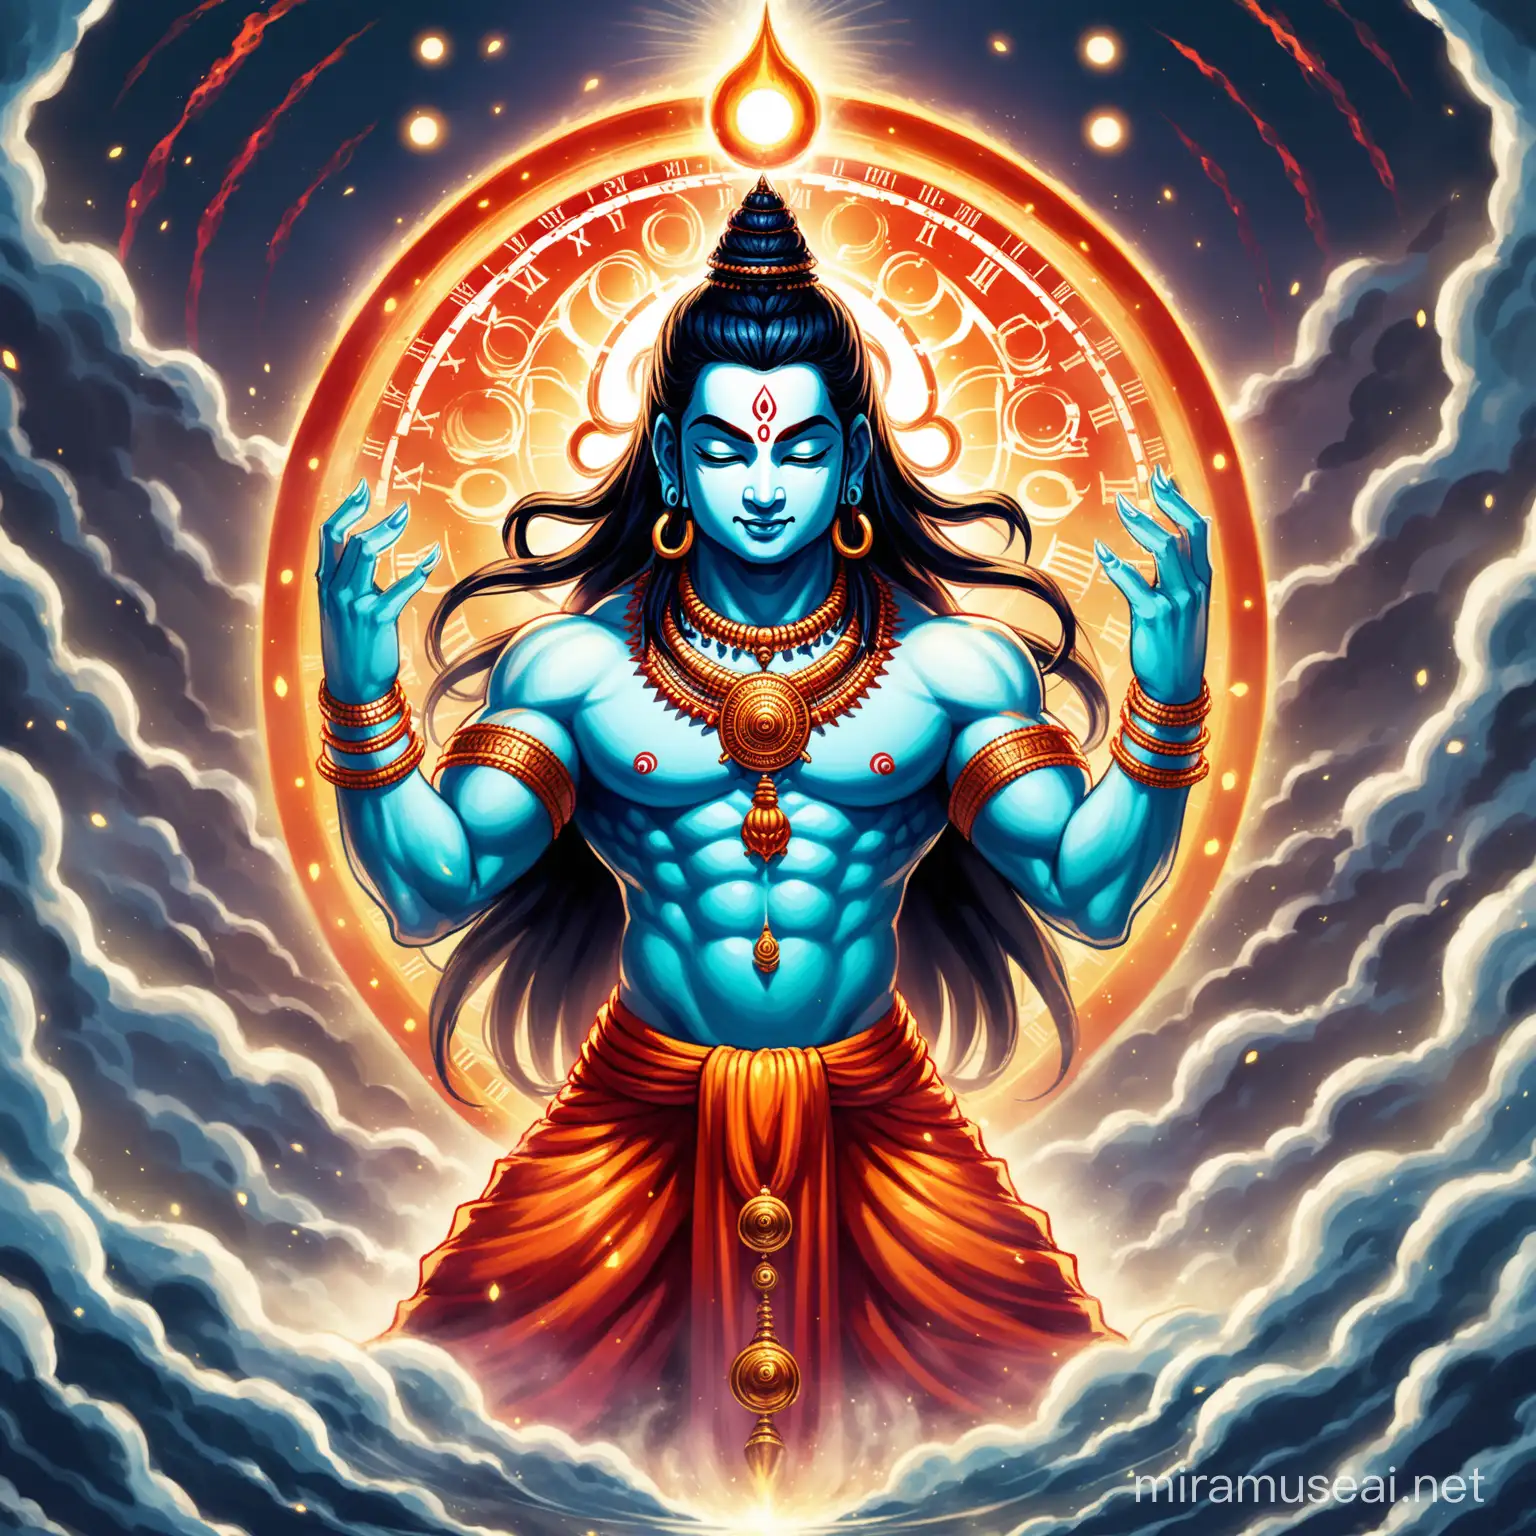 Majestic Shiva Mahakaal as Time Guardian and Destructor in Fierce Form